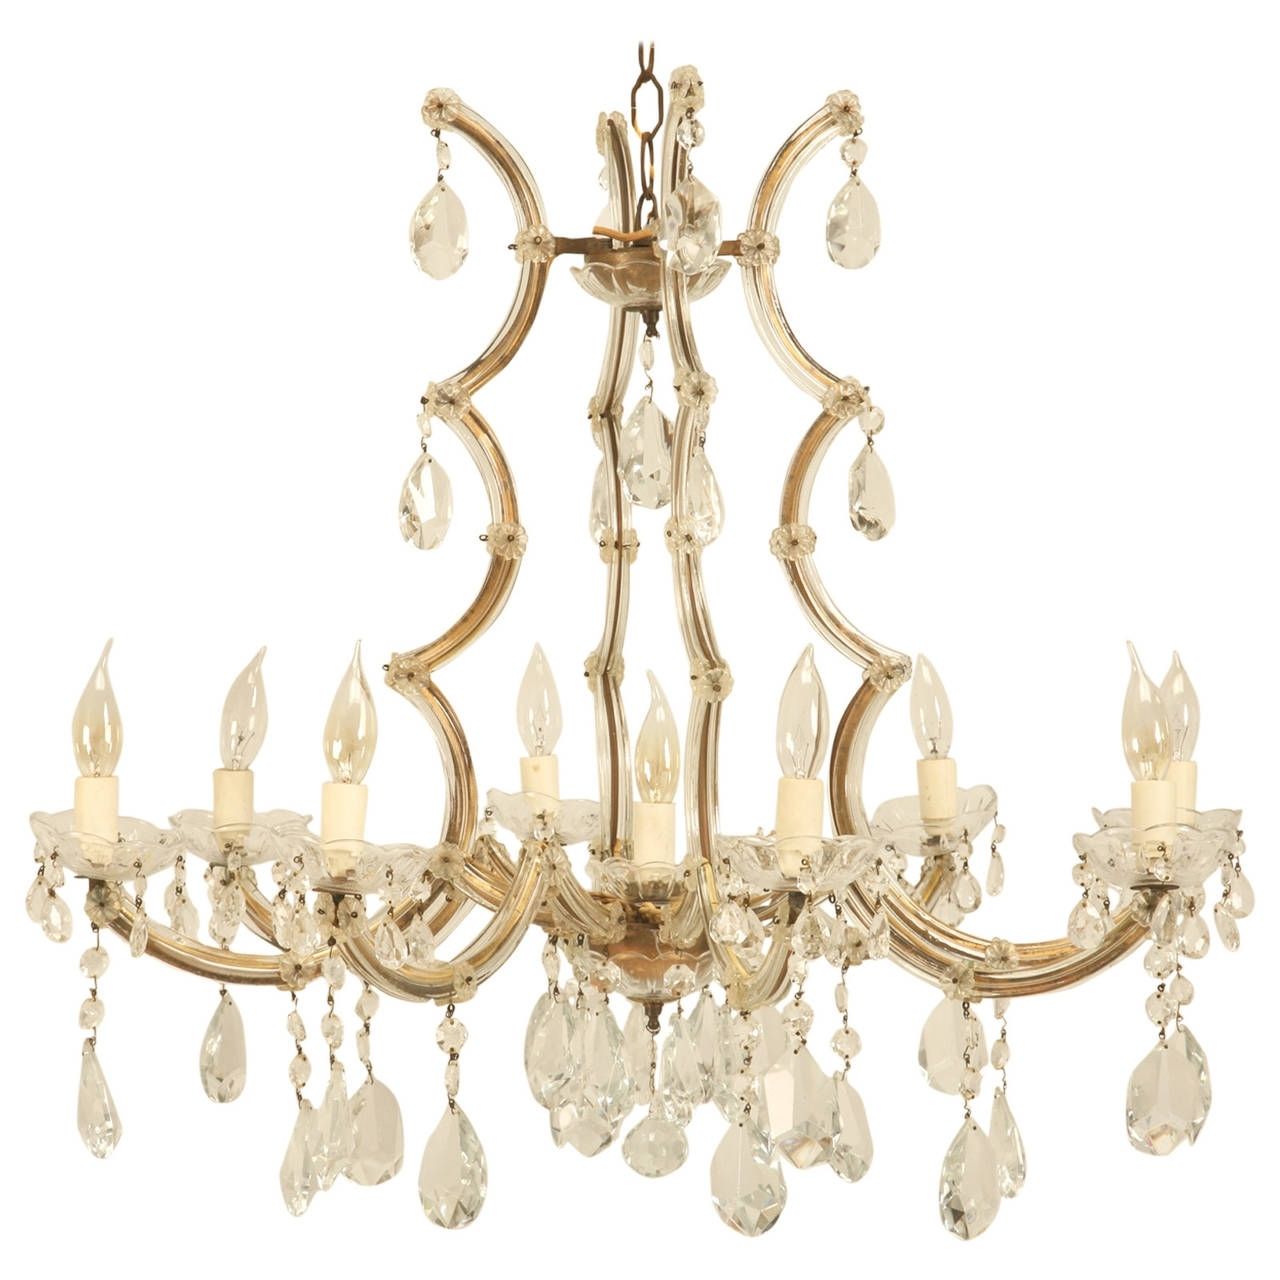 Spanish Chandelier In A Baroque Style, Circa 1930s For Sale At 1stdibs Intended For Best And Newest Baroque Chandelier (View 15 of 15)